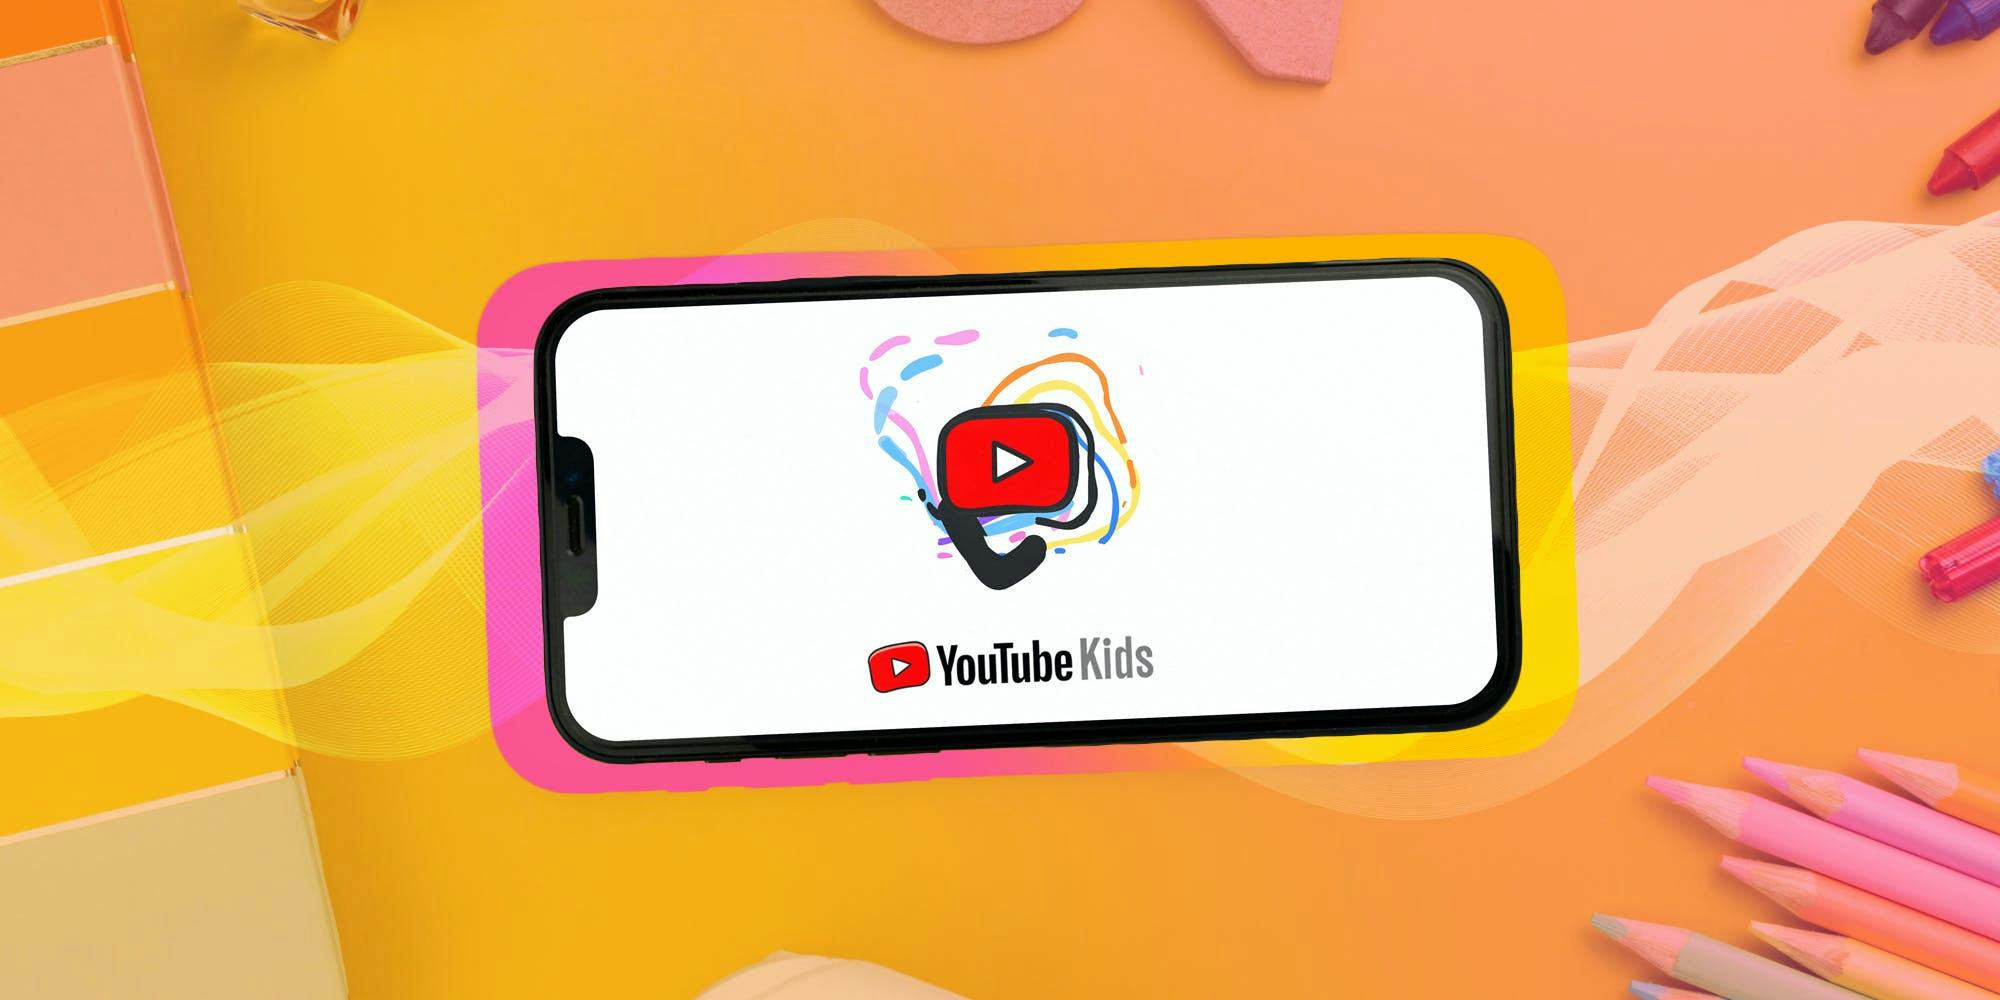 Court says YouTube channels with children’s audiences like Ryan’s World, CookieSwirlC, Cartoon Network must defend against state-level children’s privacy class action lawsuit